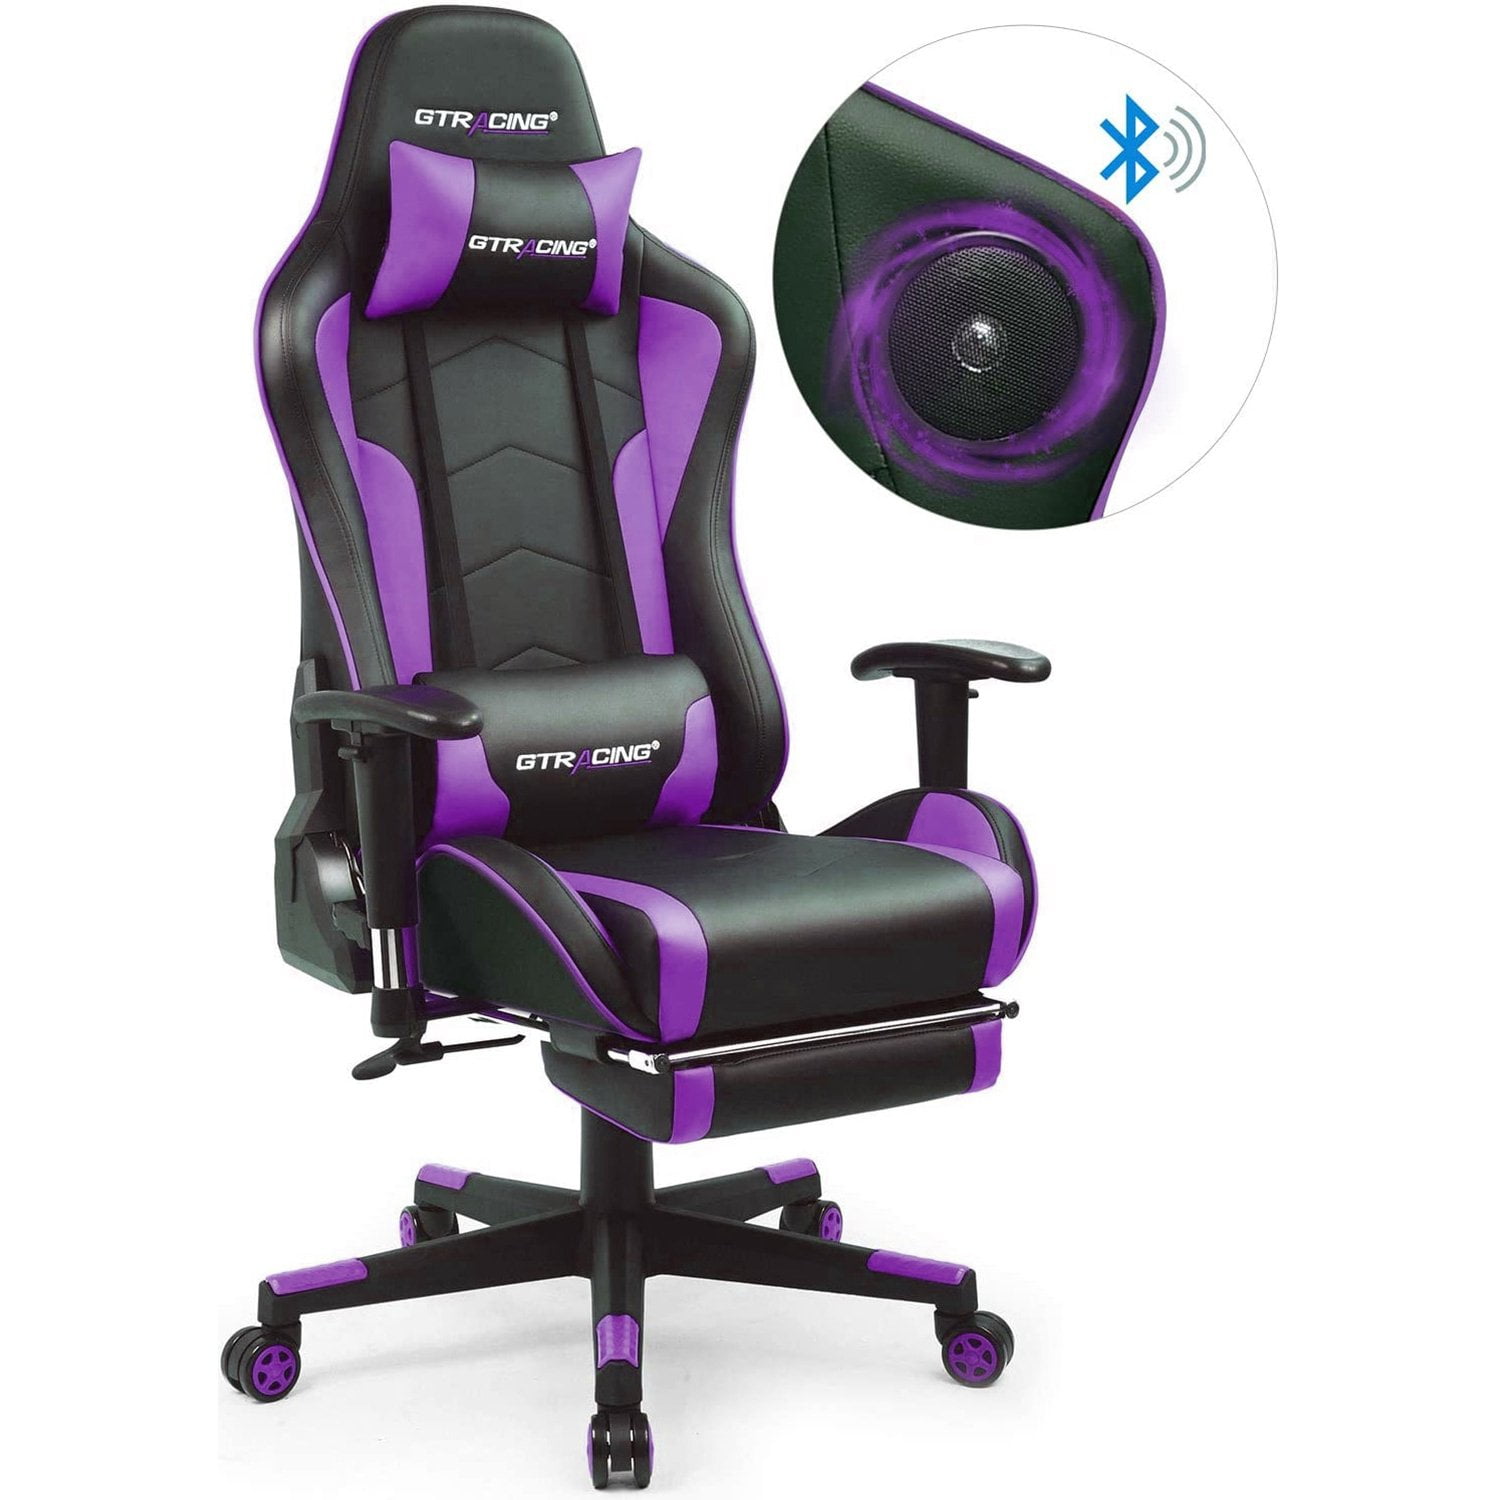 Gtracing Gaming Chair with Speakers Bluetooth and Footrest in Home Leather Office Chair, Purple ...